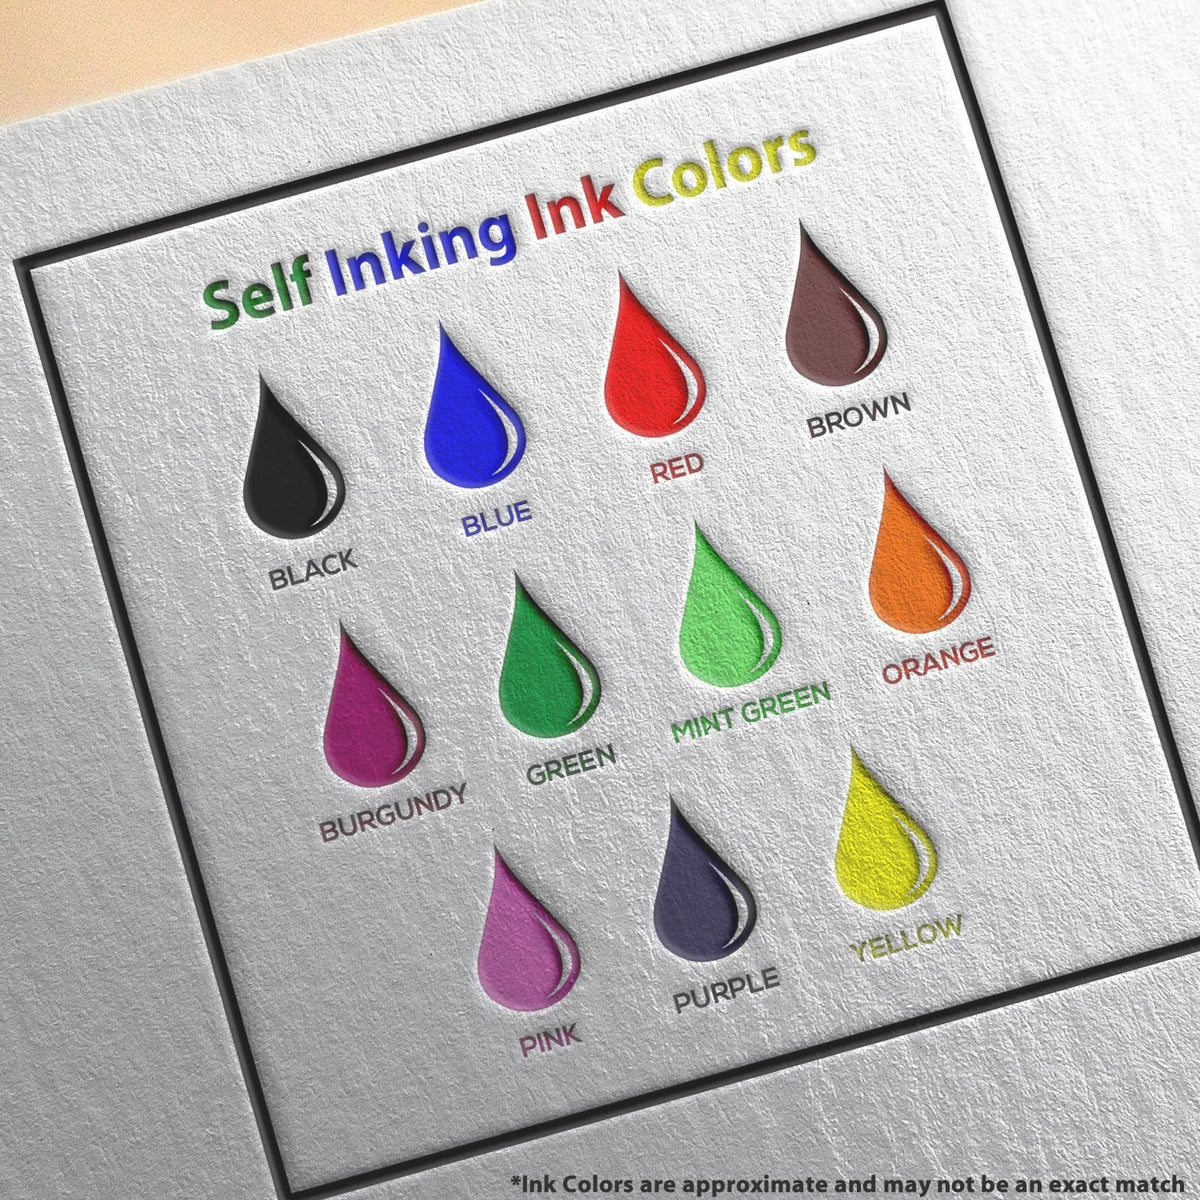 Self-Inking Review and Sign Stamp Ink Color Options